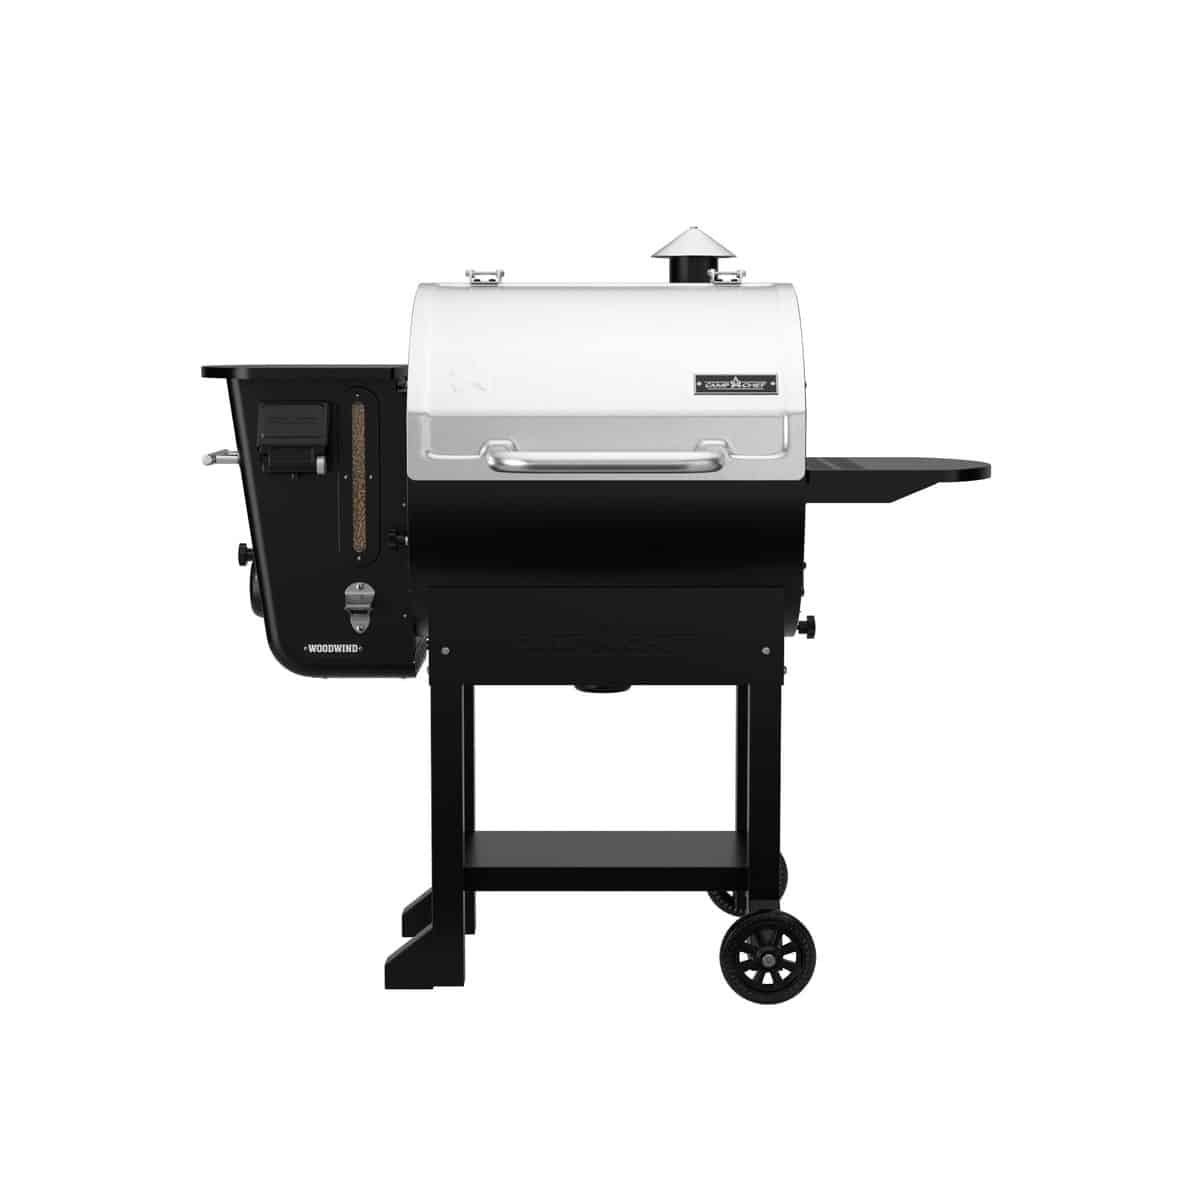 Camp Chef Woodwind pellet grill.